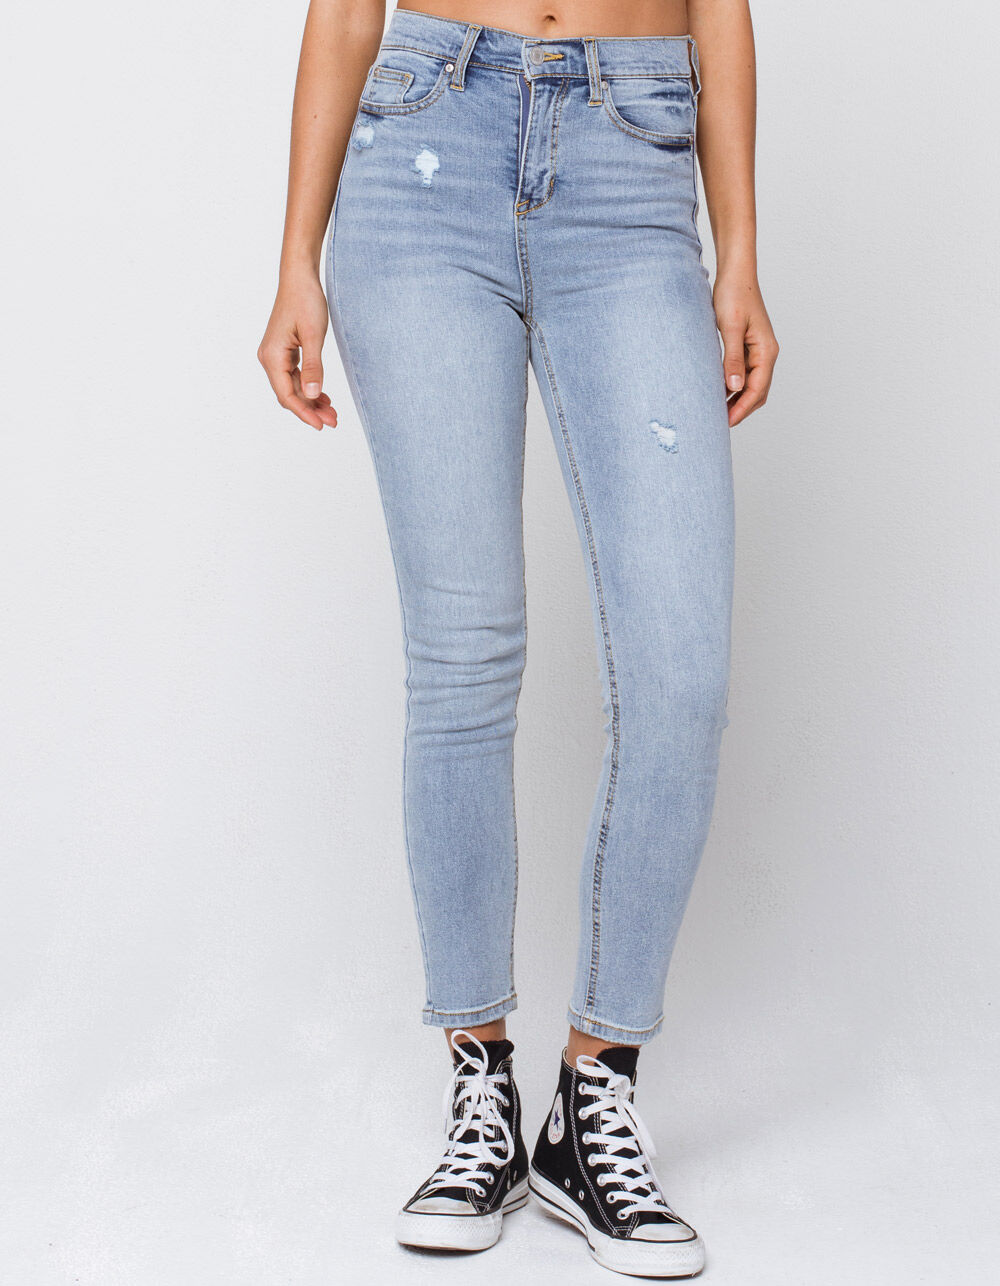 SKY AND SPARROW Womens Skinny Jeans - LIGHT WASH | Tillys